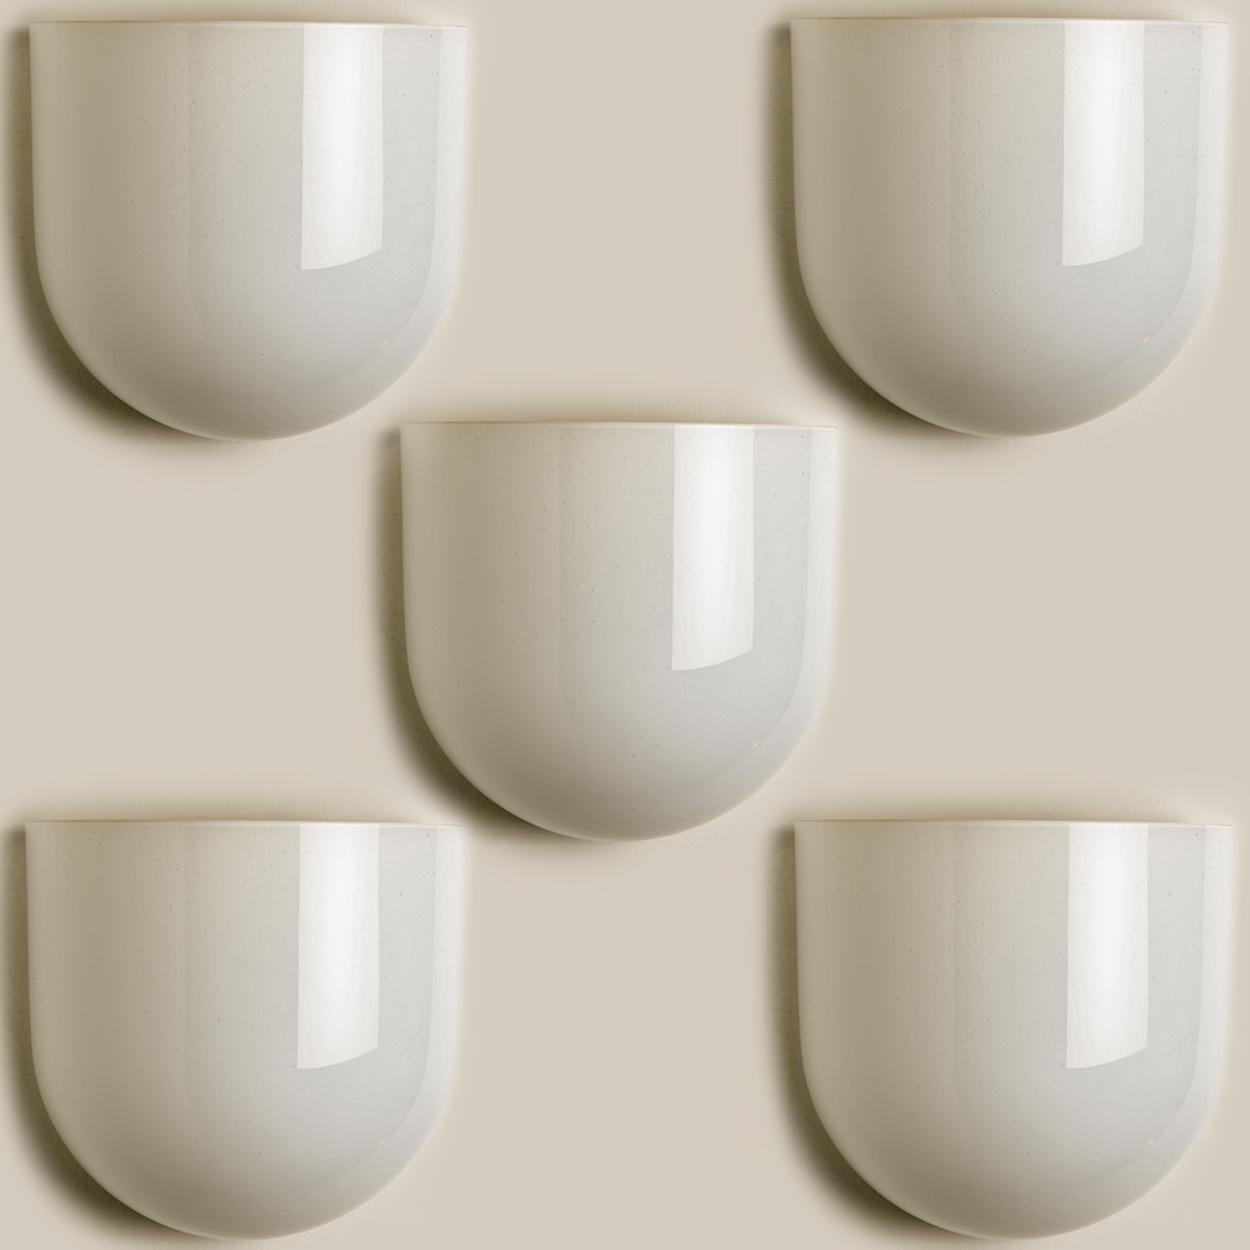 Beautiful white milkglass wall lights with small air bubbles. The lights are half cylinder shaped.
They are manufactured by the company Glasshütte Limburg, in Germany, Europe around 1970.

This wall light gives a warm light that suits any